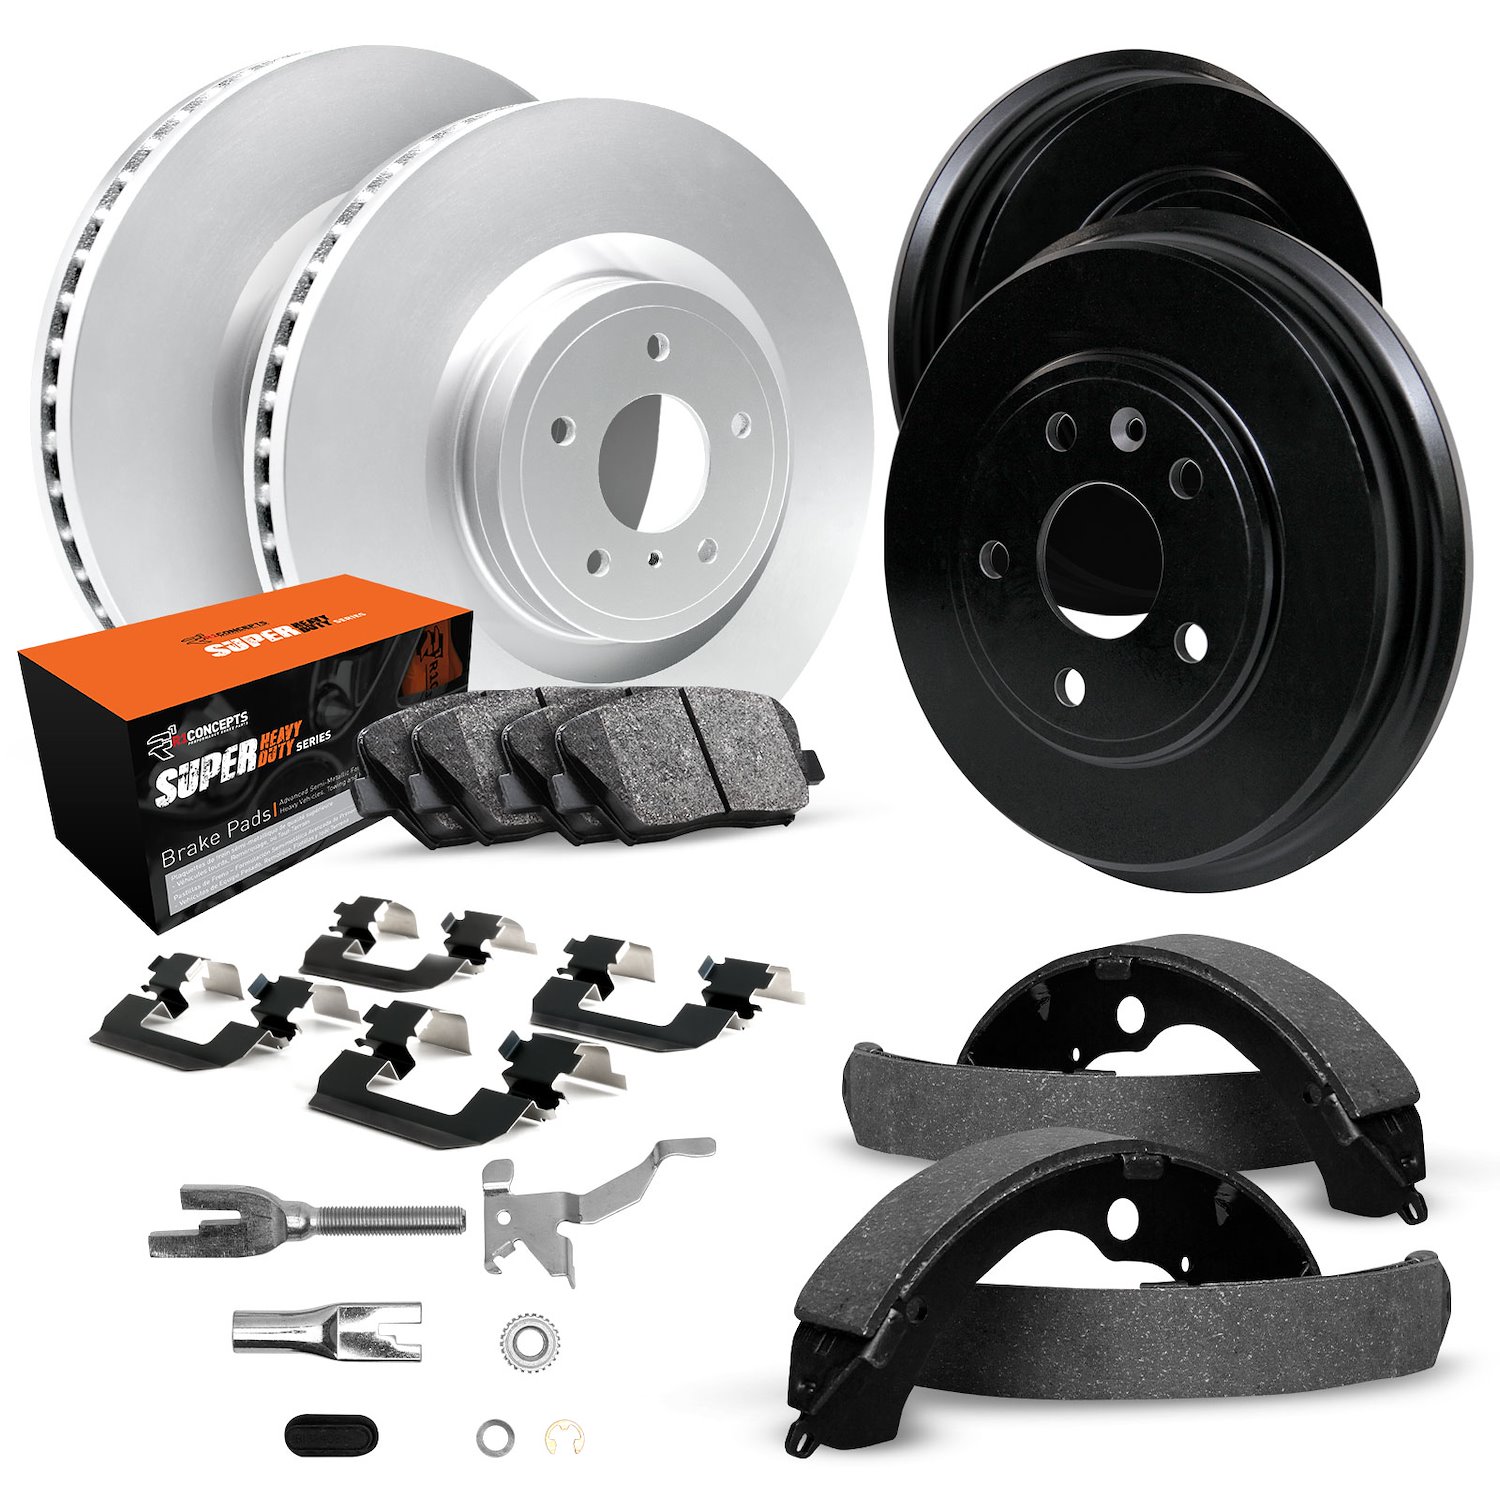 GEO-Carbon Brake Rotor & Drum Set w/Super-Duty Pads, Shoes, Hardware/Adjusters, 1990-2002 GM, Position: Front & Rear